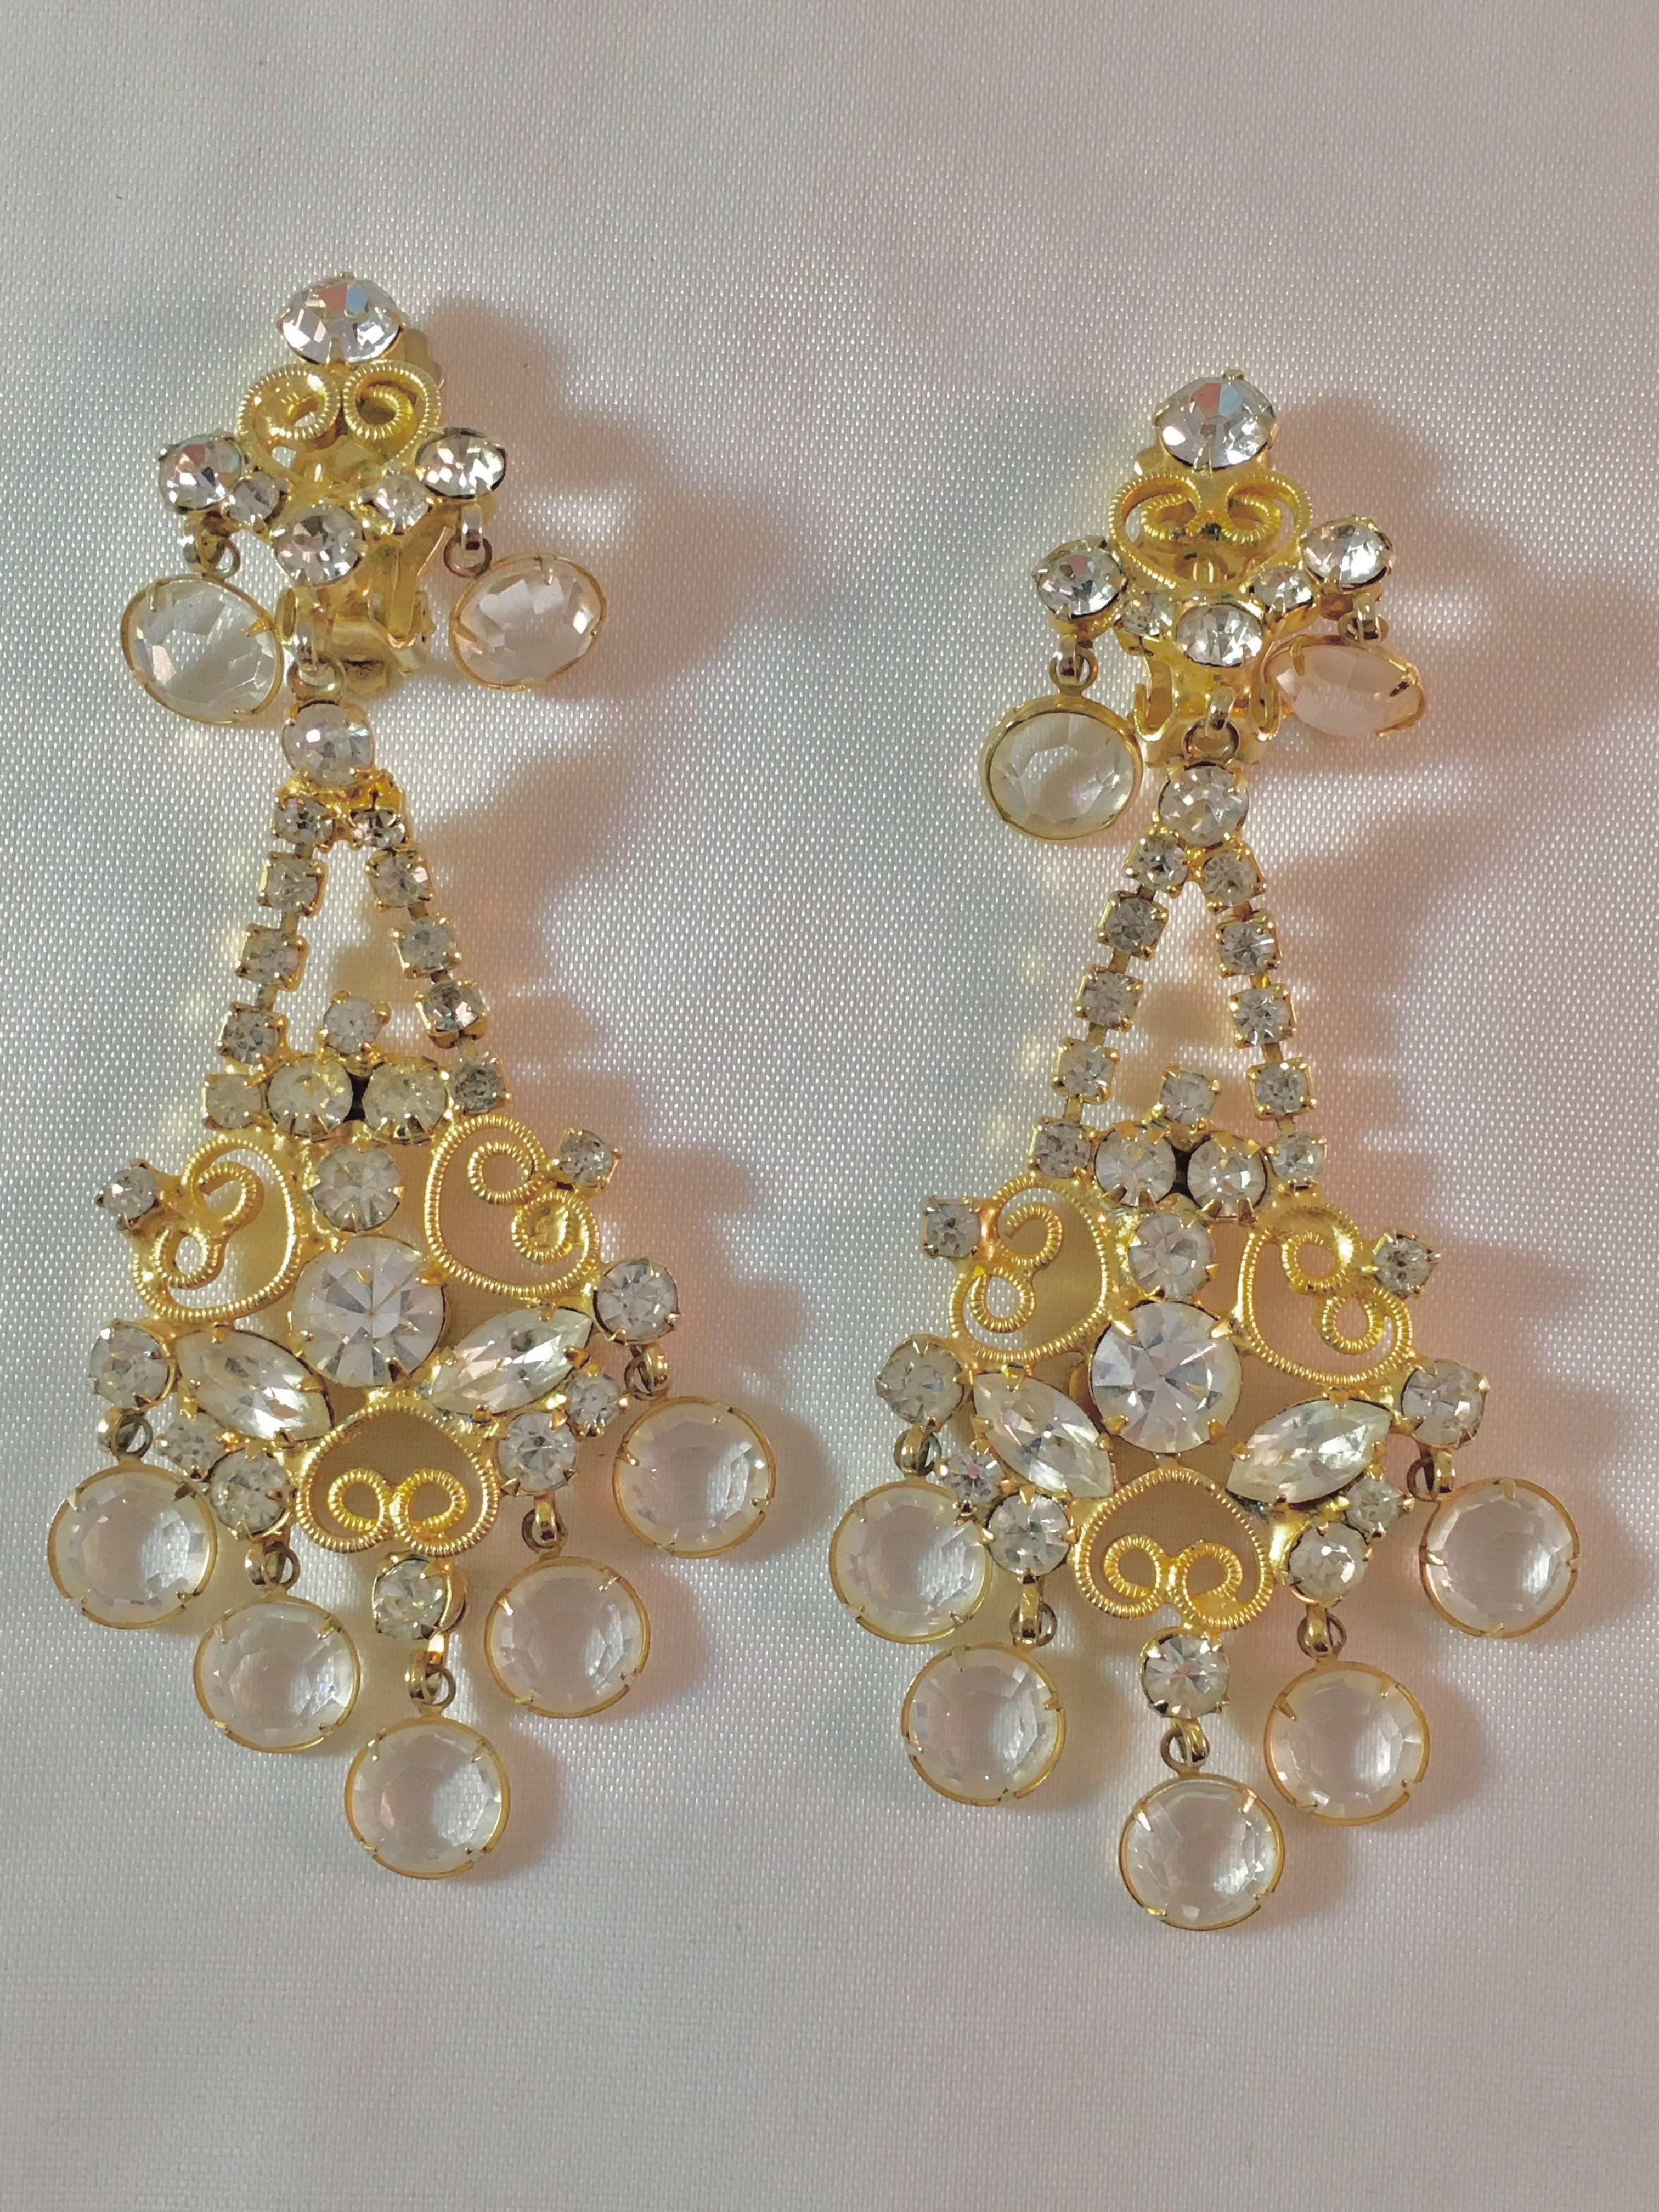 These showstoppers are an amazing example of Kenneth Jay Lane at his 1960s peak. They are chandelier clip-on earrings made up of clear rhinestones set in goldtone metal. They measure 3 1/2" long x 1 3/4" wide and are marked 'K.J.L.' on the